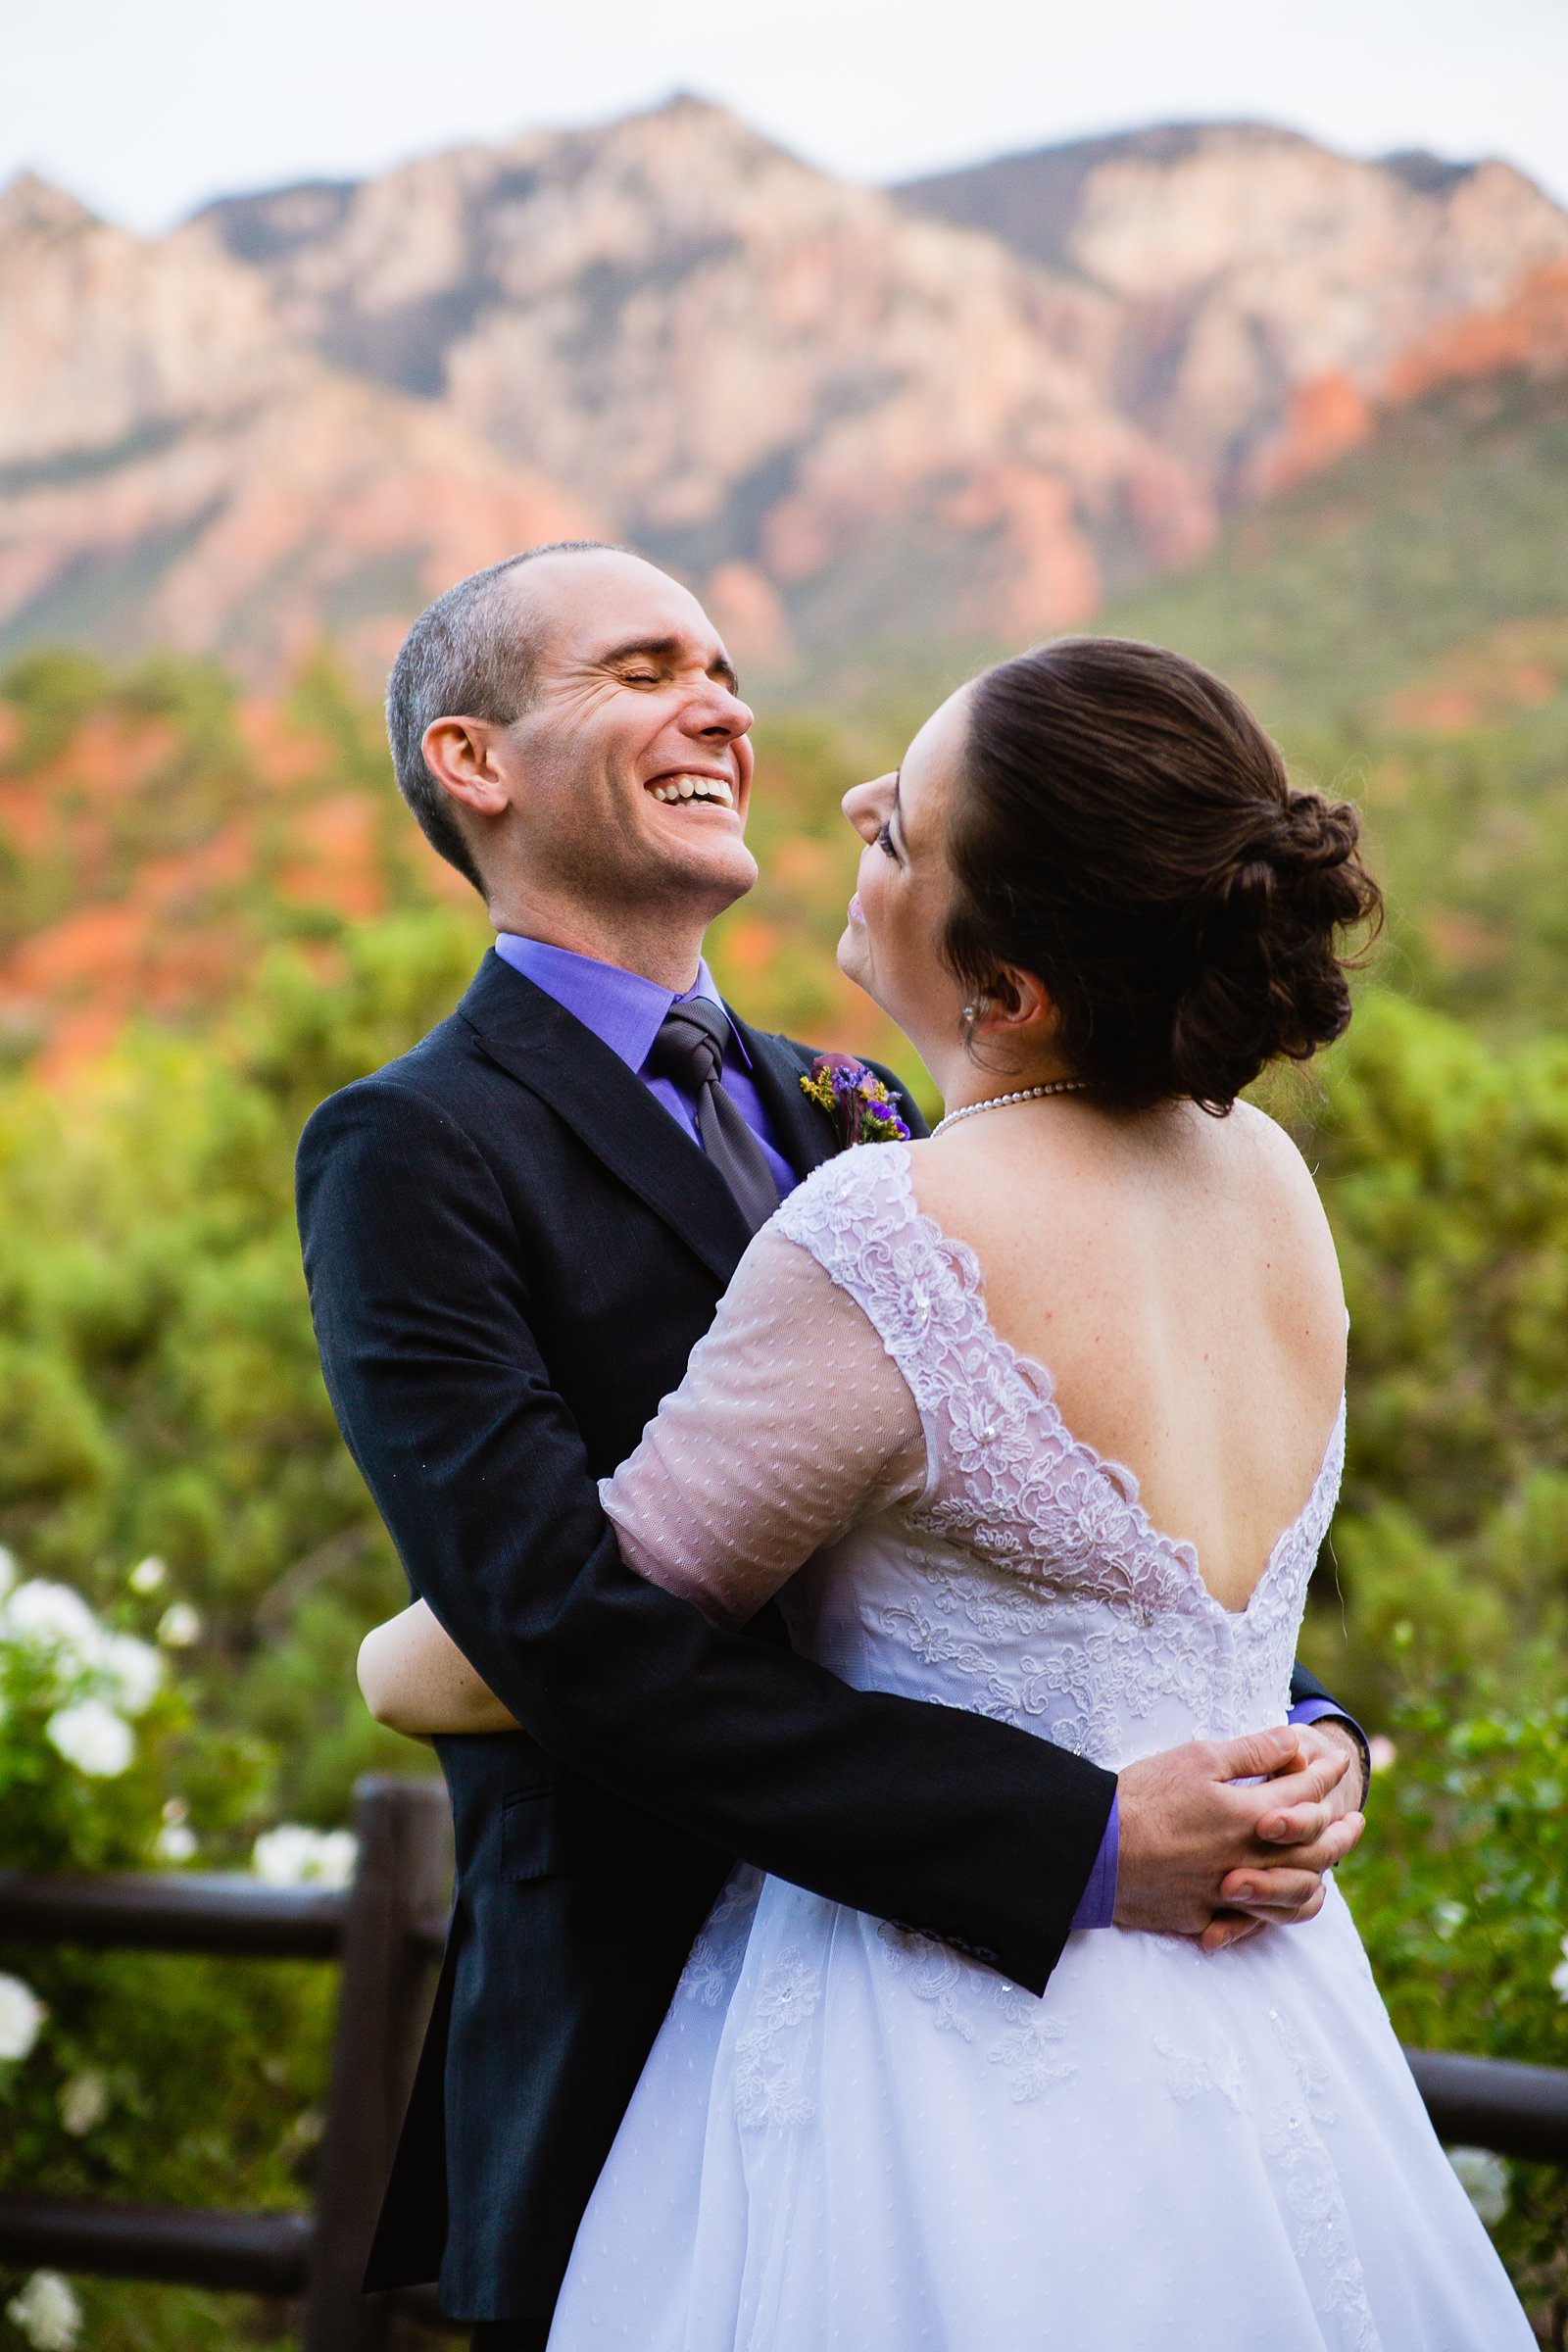 Bride and groom laughing together during their L'Auberge de Sedona wedding by Sedona wedding photographer PMA Photography.